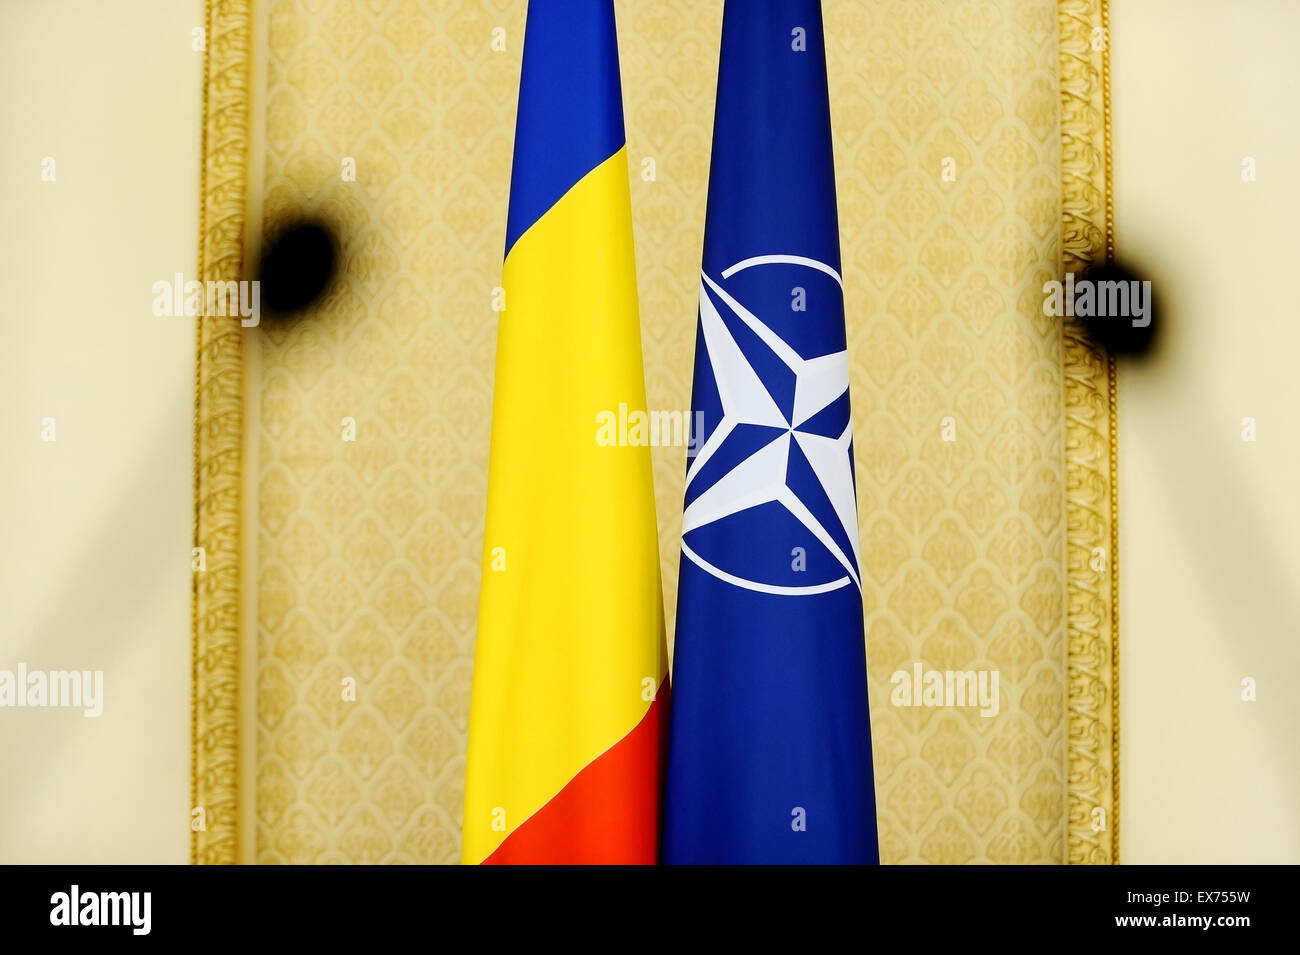 Romania and NATO flags shoot through two press microphones Stock Photo